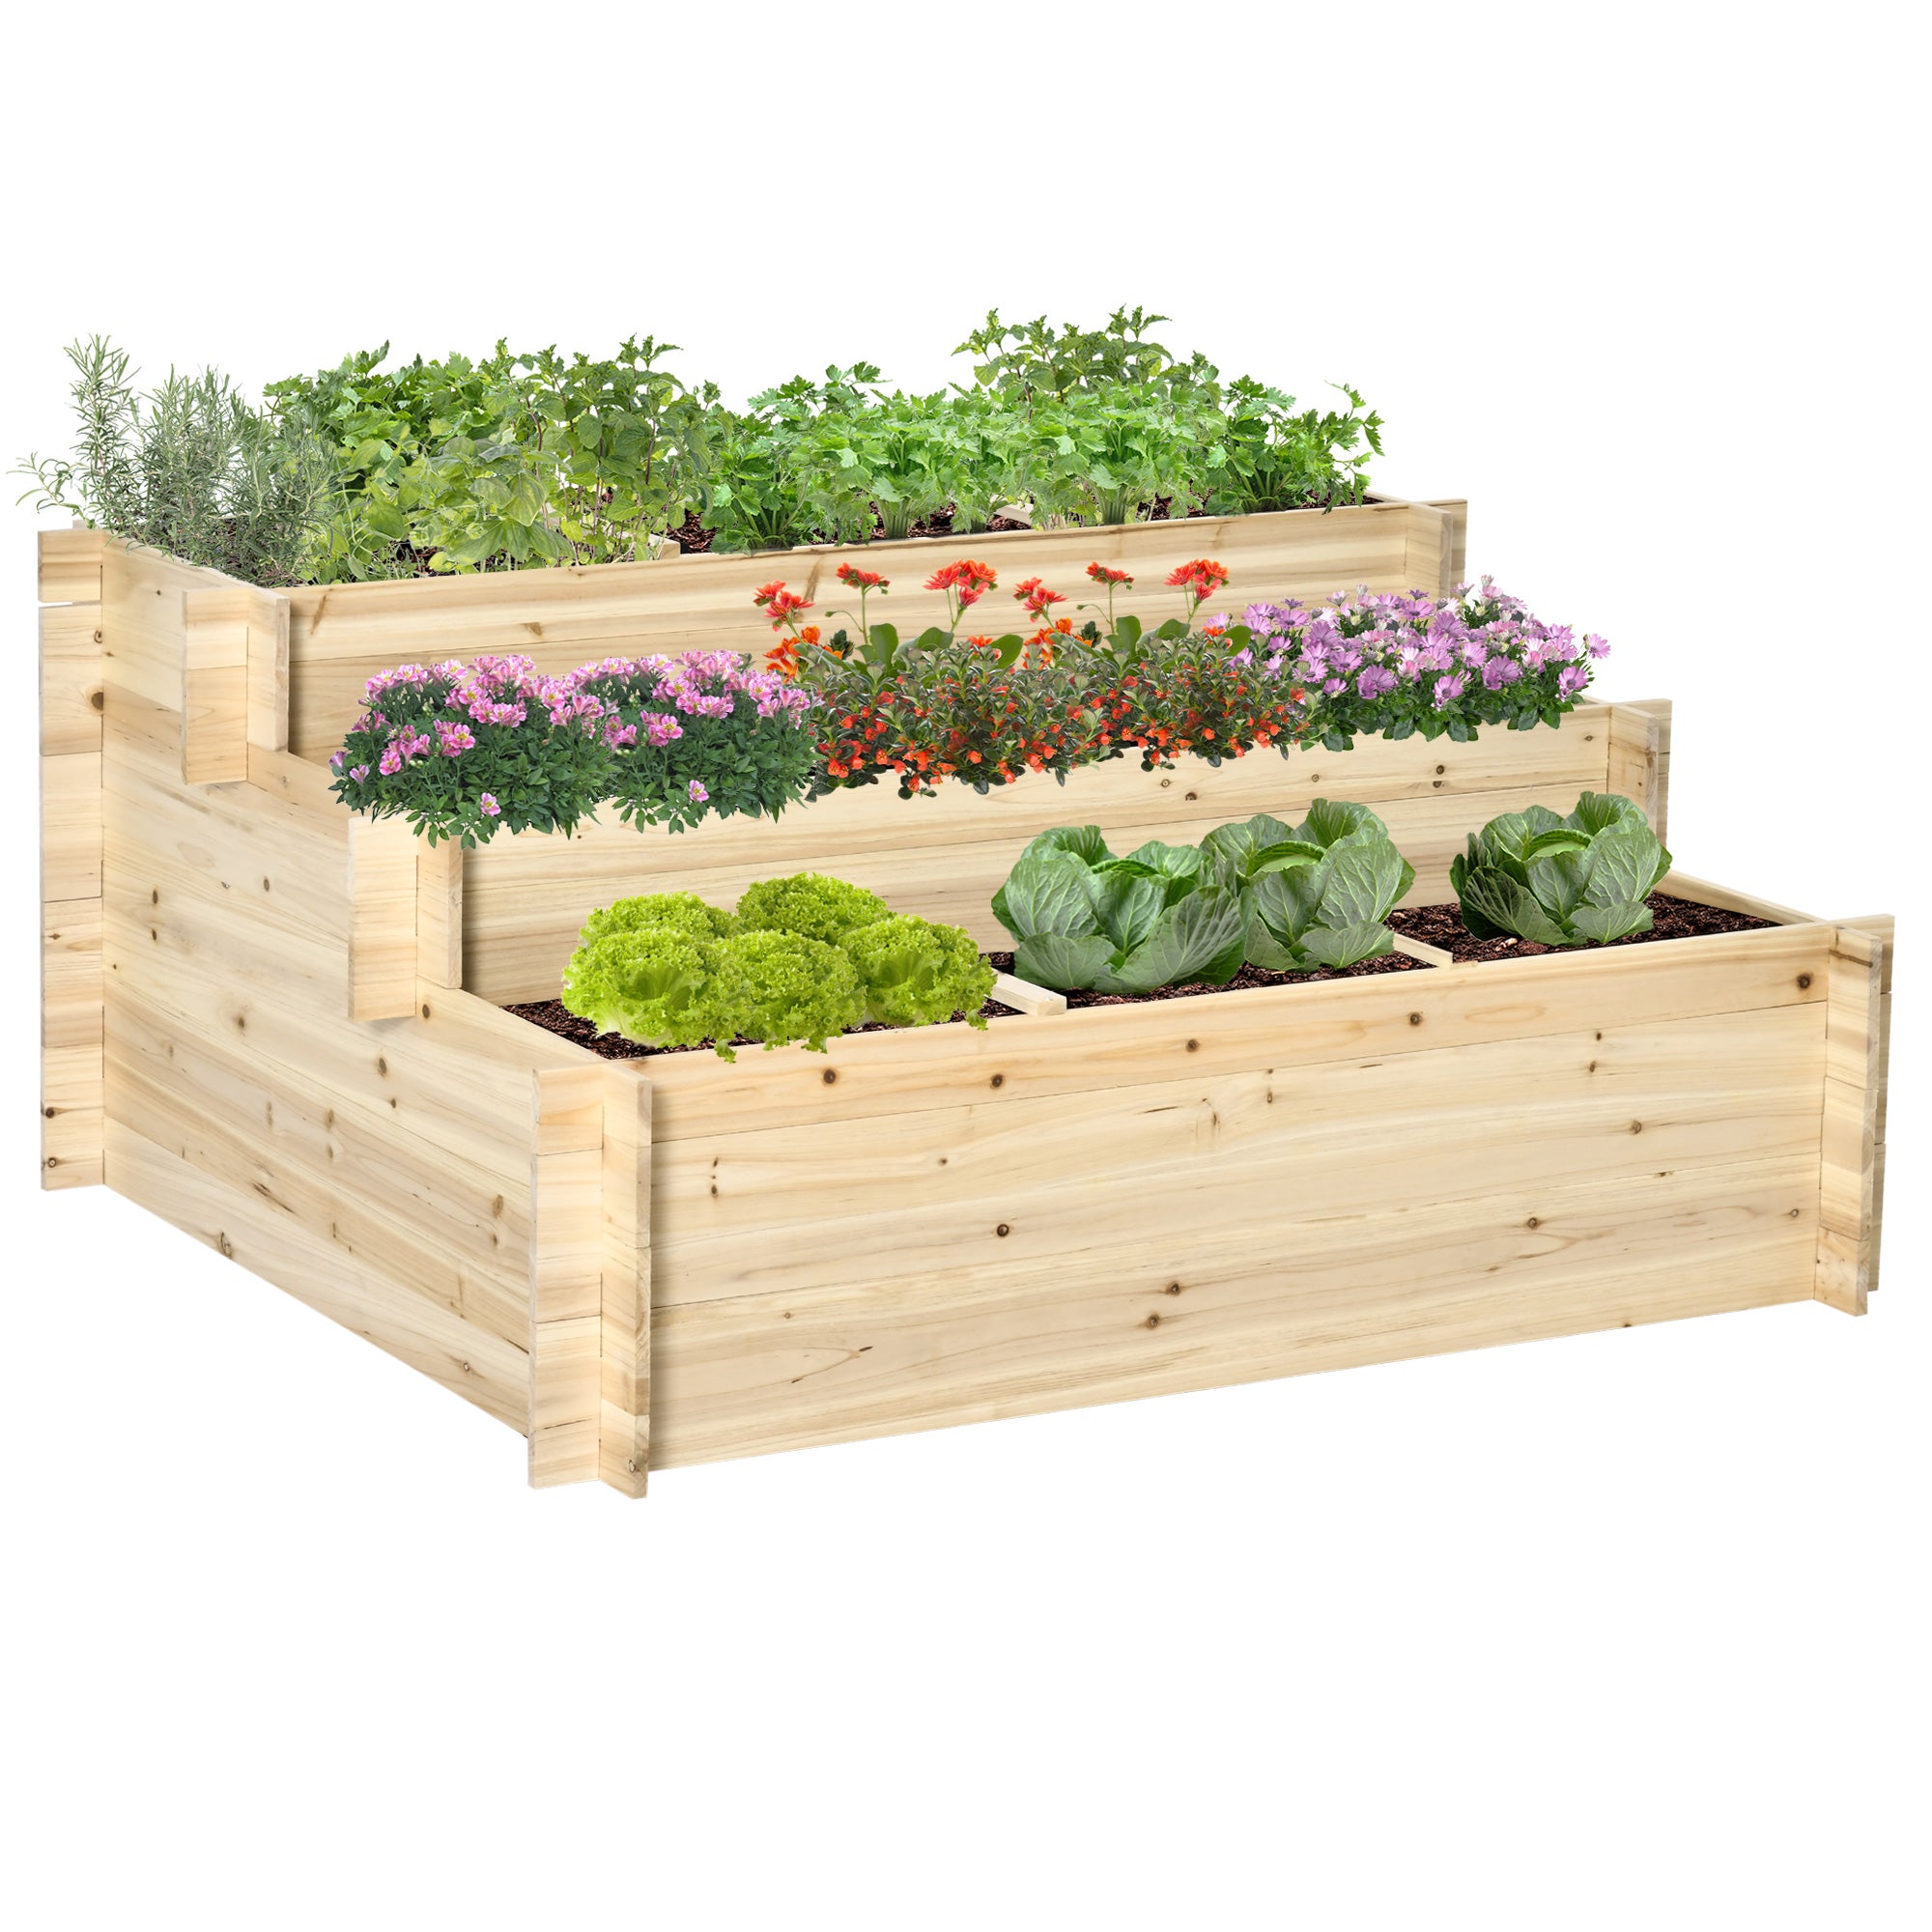 Outsunny 3 Tier Raised Garden Bed Elevated Planter Flower Box with 9 Grow Grids and Non-woven Fabric for Vegetables - Flower - Herb Outdoor Indoor Use